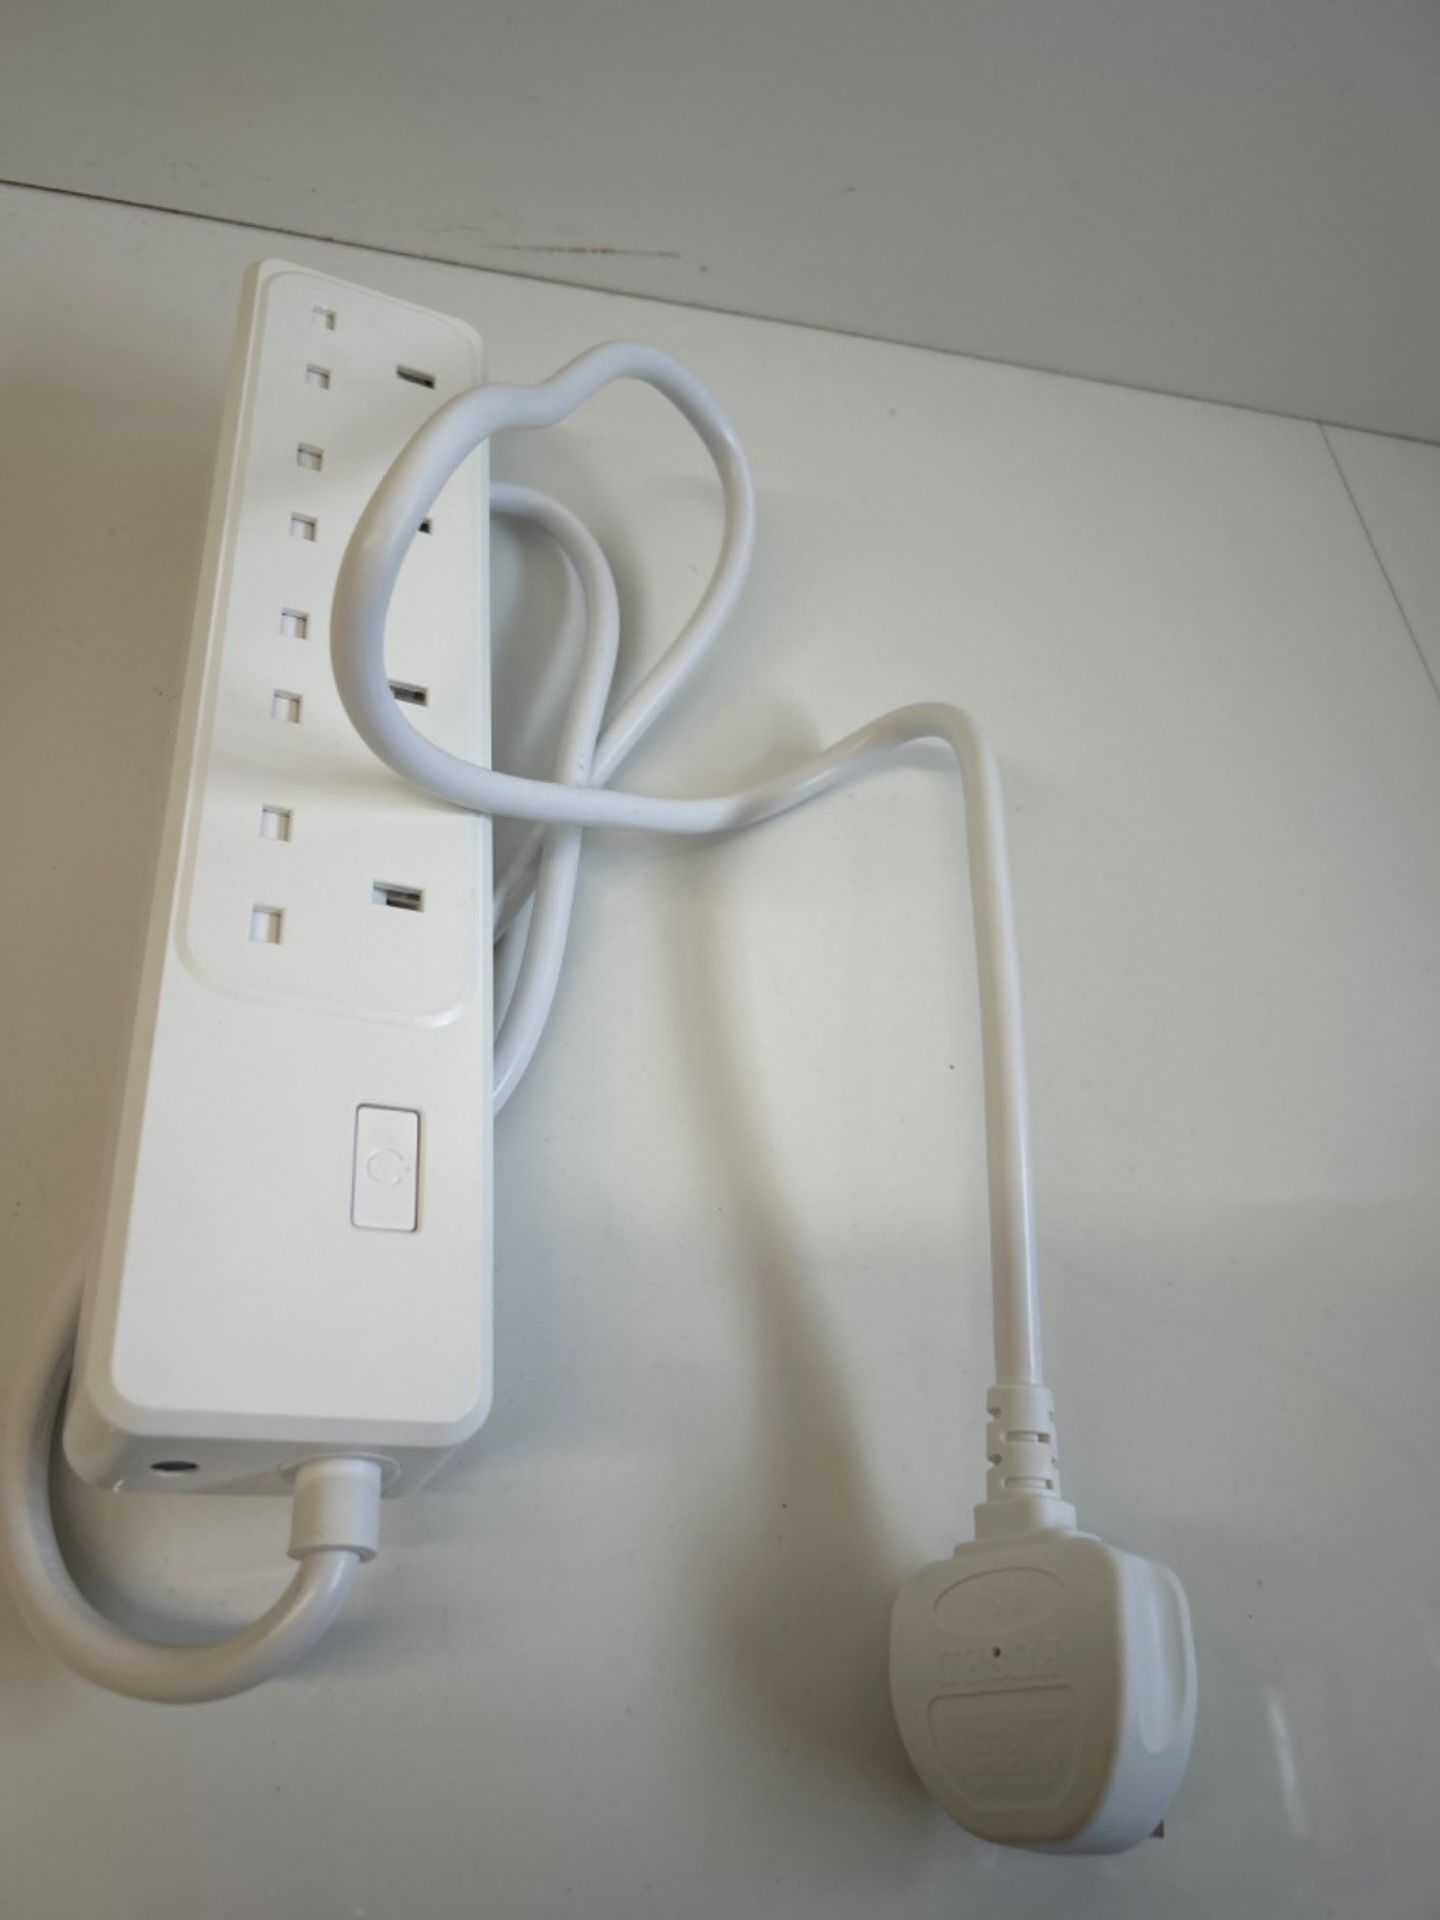 Smart Power Strip WiFi Plug - Smart Outlets Smart Extension Lead 1.8m with 4 AC Outlets, Compatible - Image 3 of 3